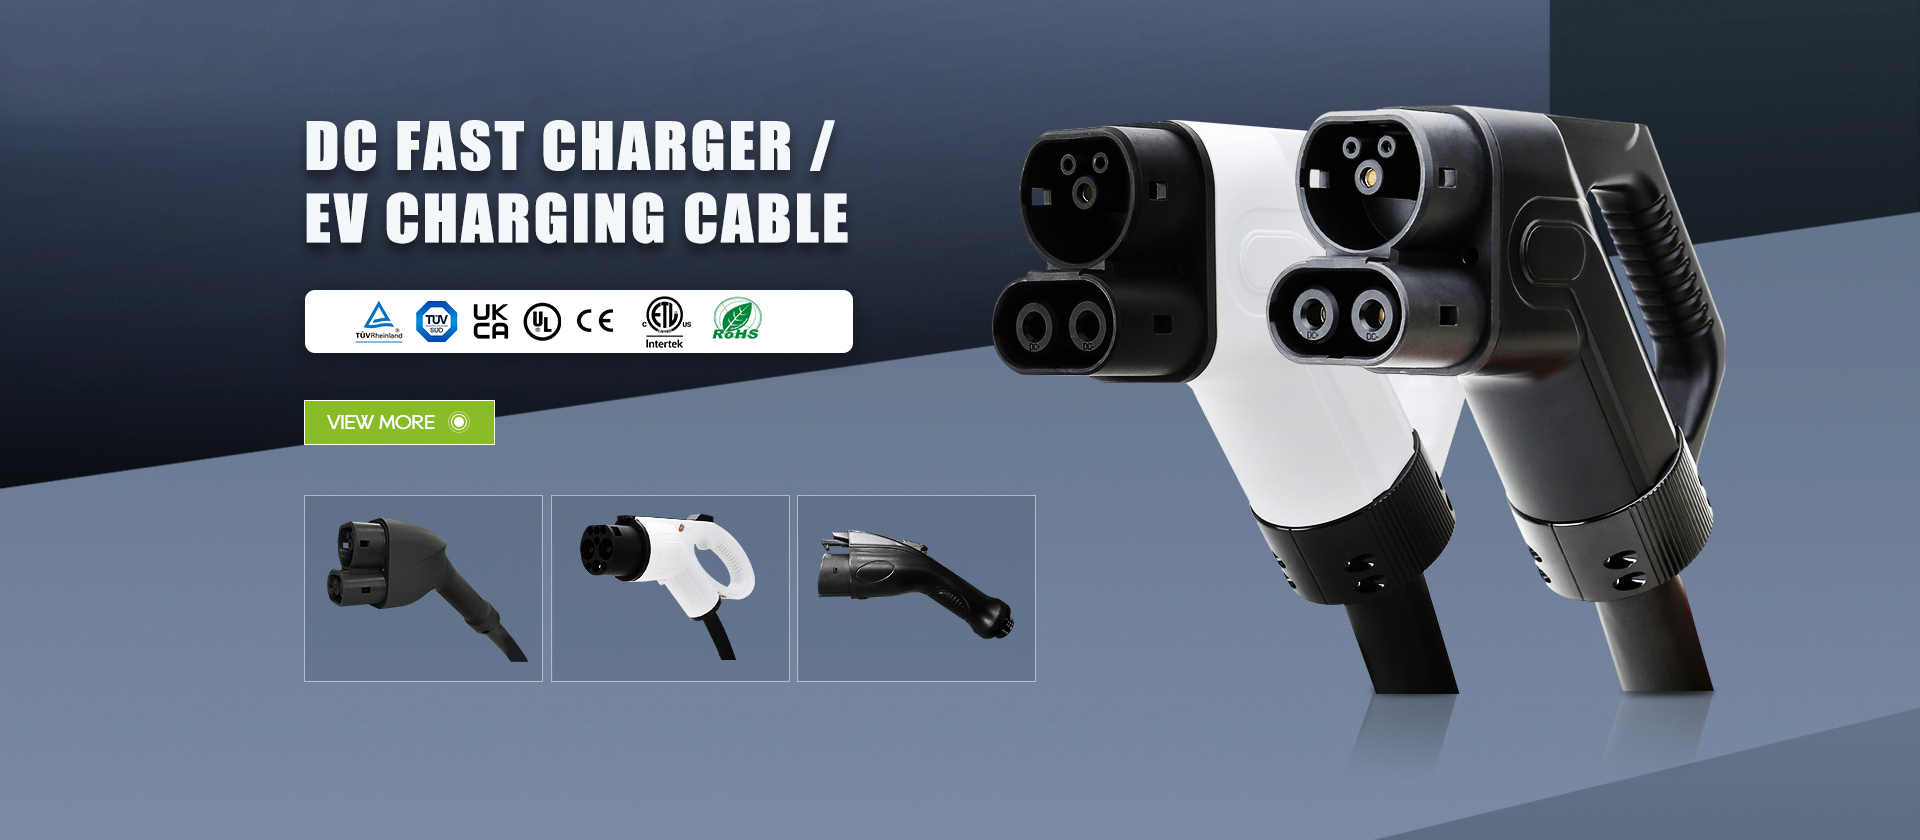 DC Fast Charger / EV Charging Cable